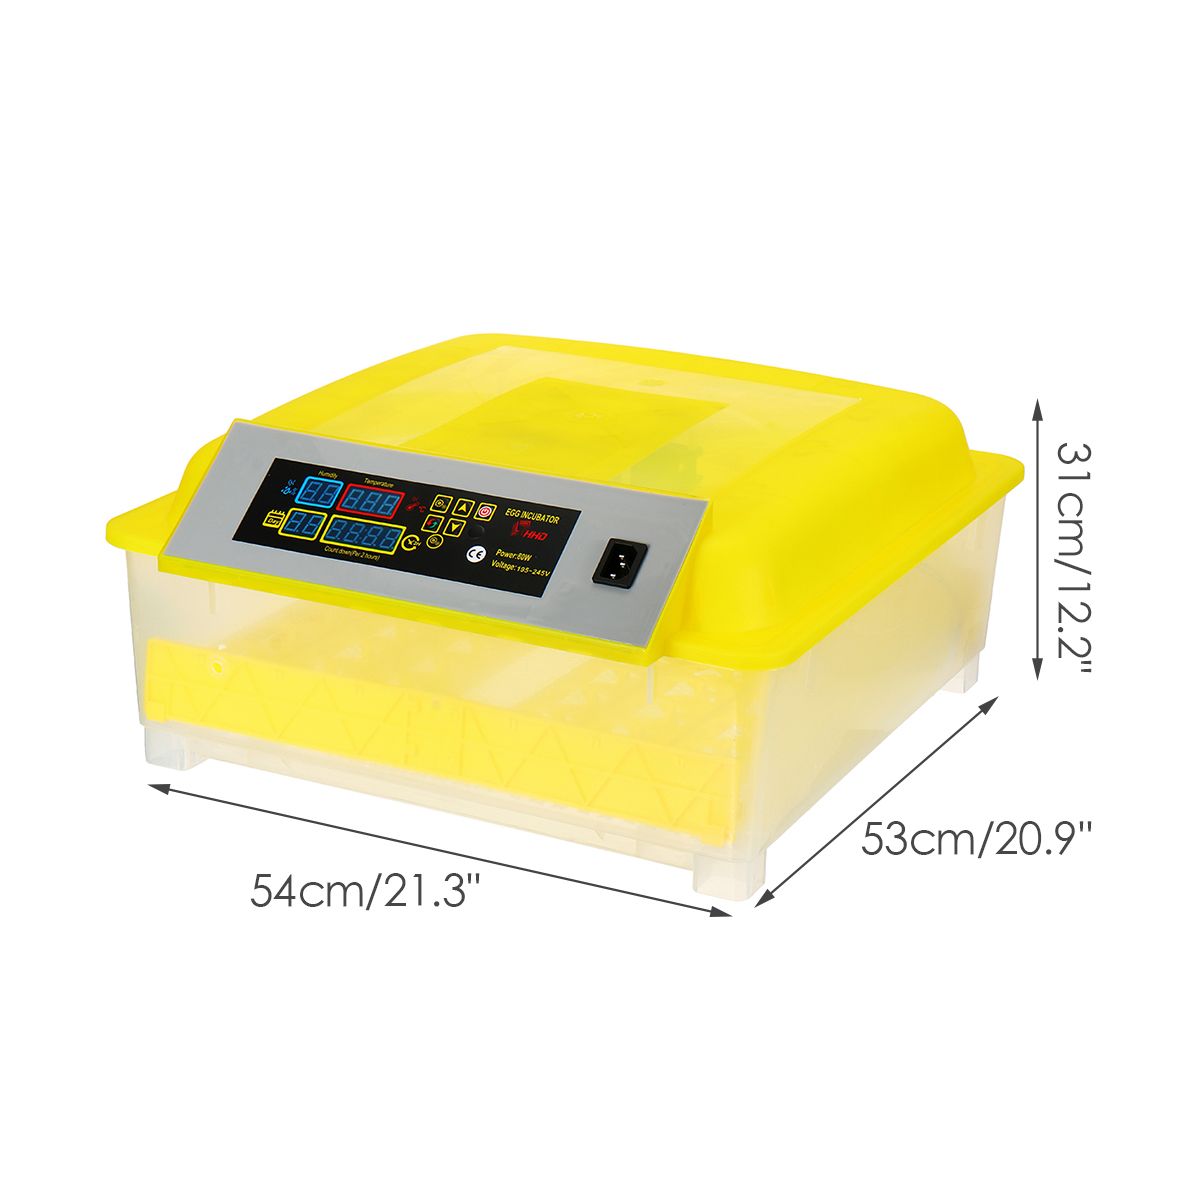 Automatic-48-Egg-Incubator-Home-LED-Candling-Chicken-Duck-Hatcher-Pigeon-Quail-1716325